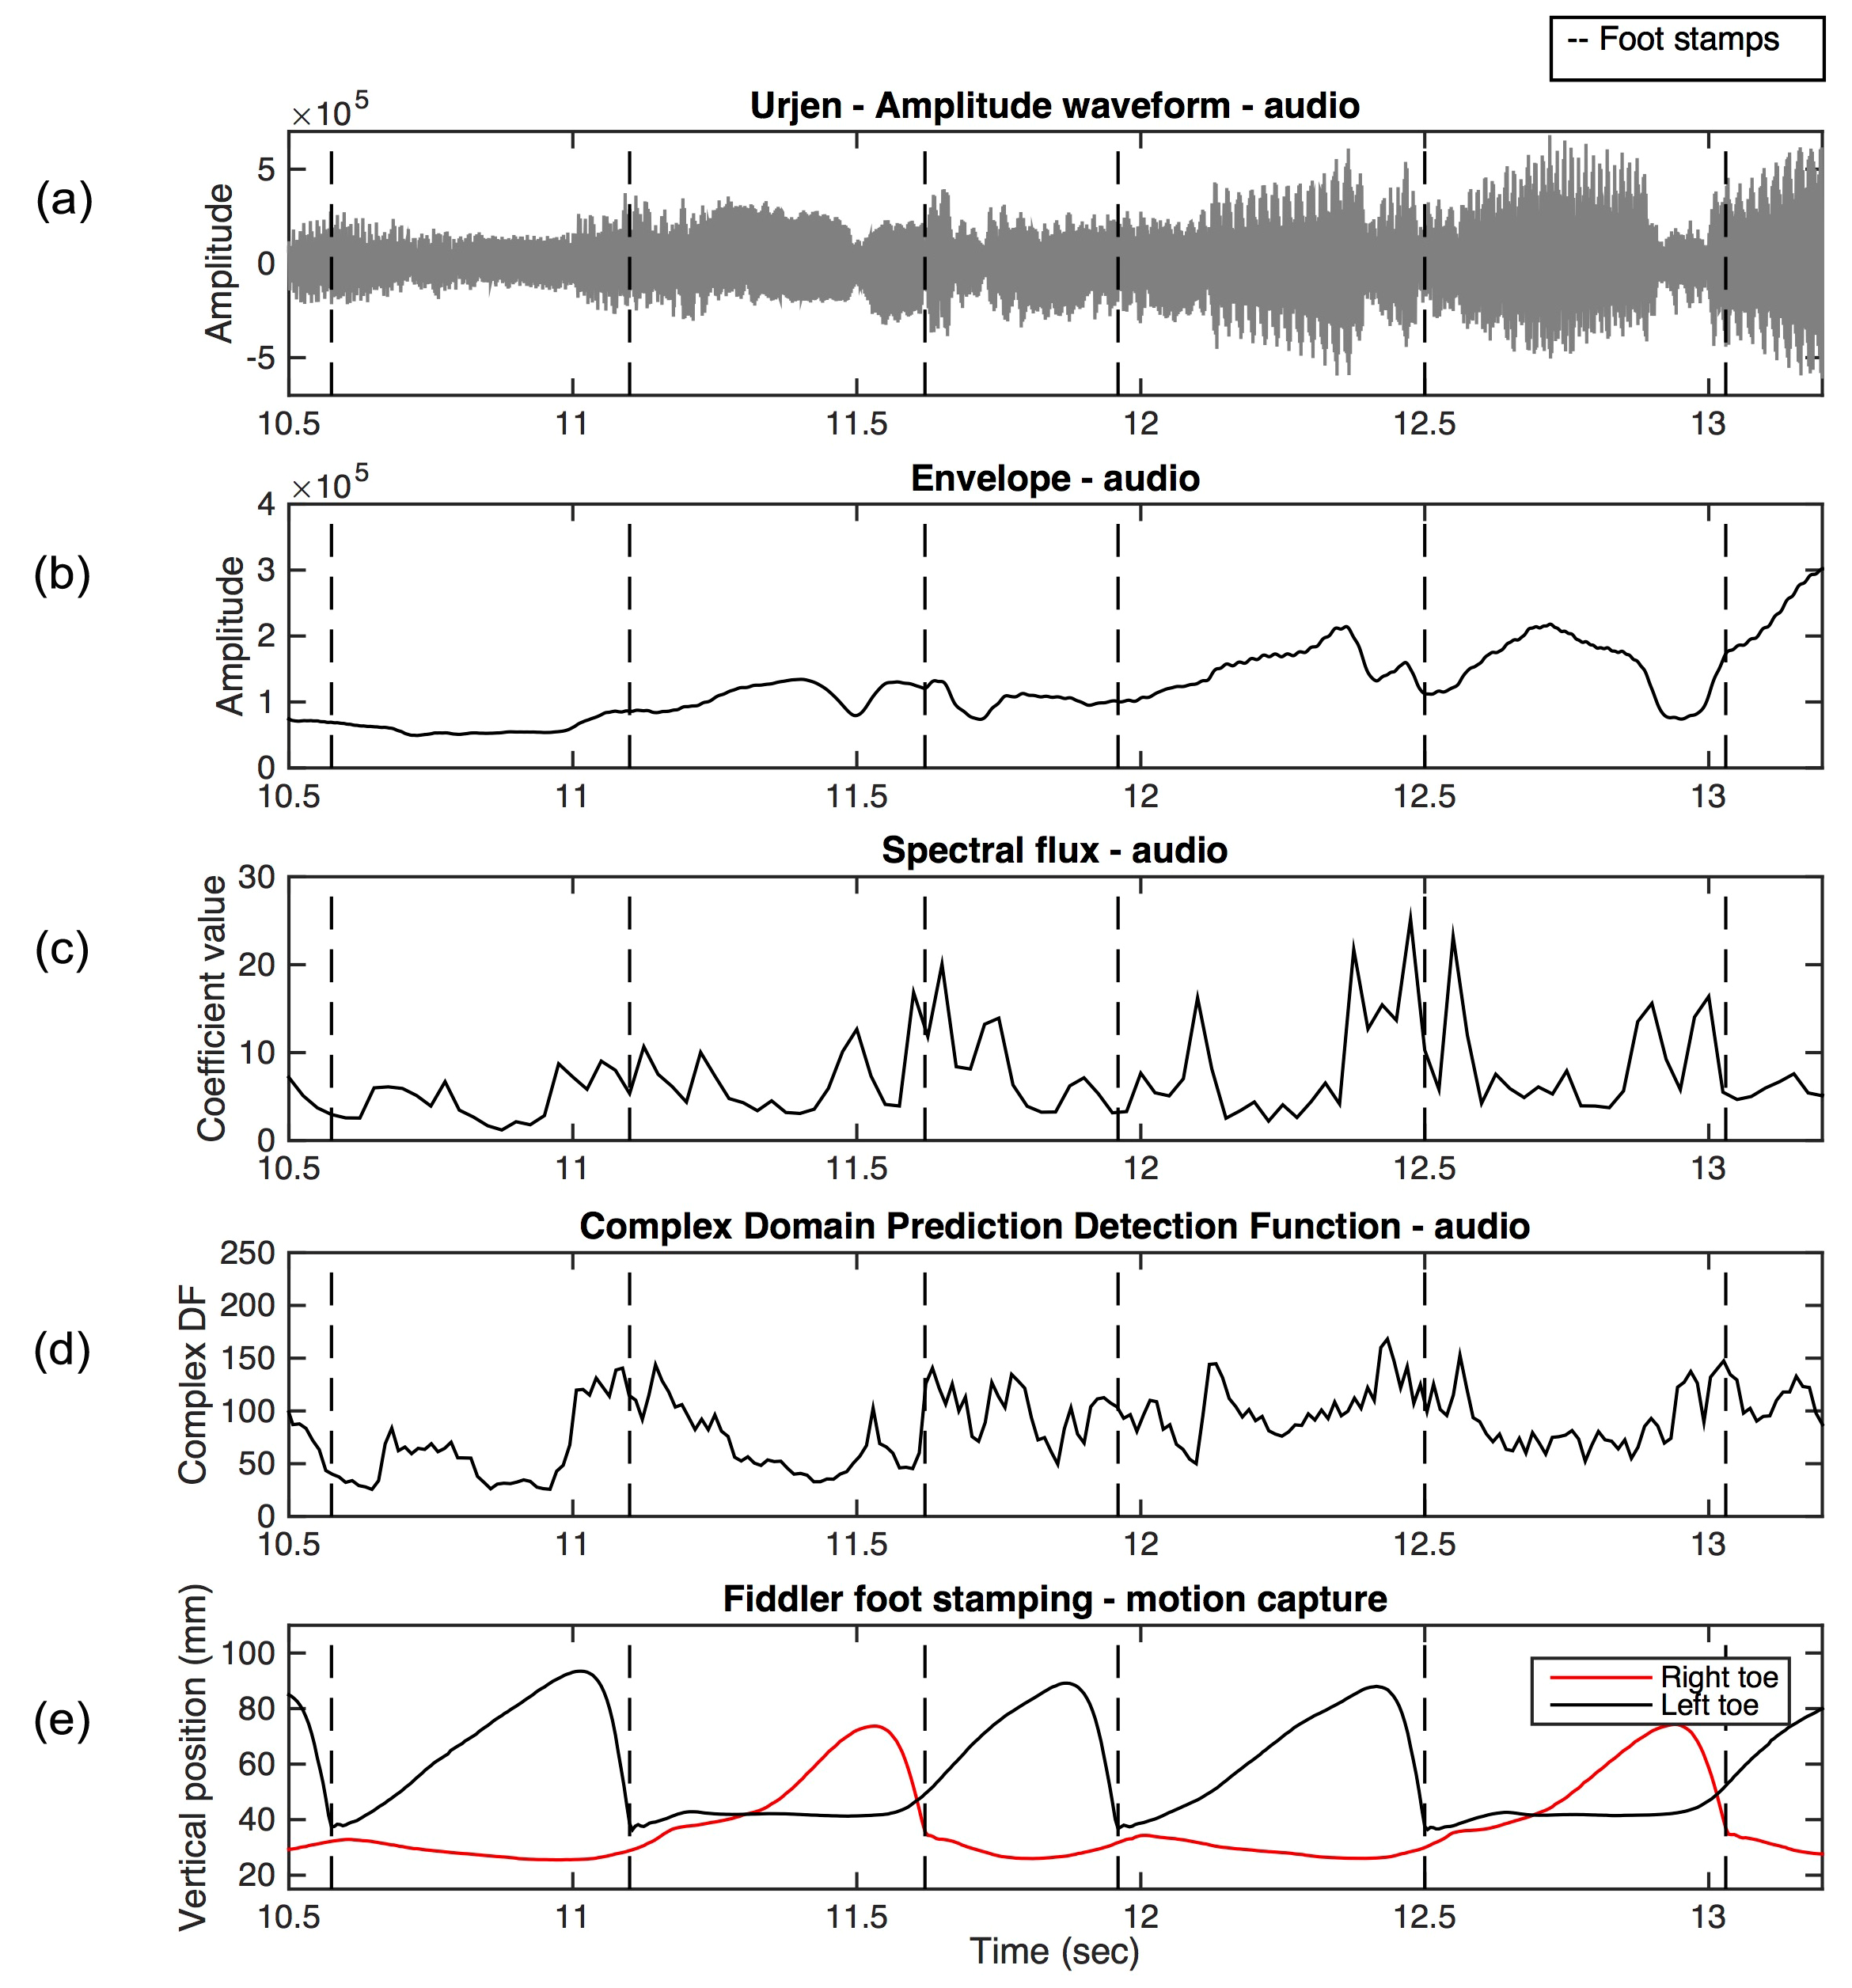 Image showing five line graphs labeled, from top to bottom, 'Urjen - Amplitude waveform - audio', 'Envelope  - audio', 'Spectral flux - audio', 'Complex Domain Prediction Detection Function - audio', and 'Fiddler foot stamping - motion capture'